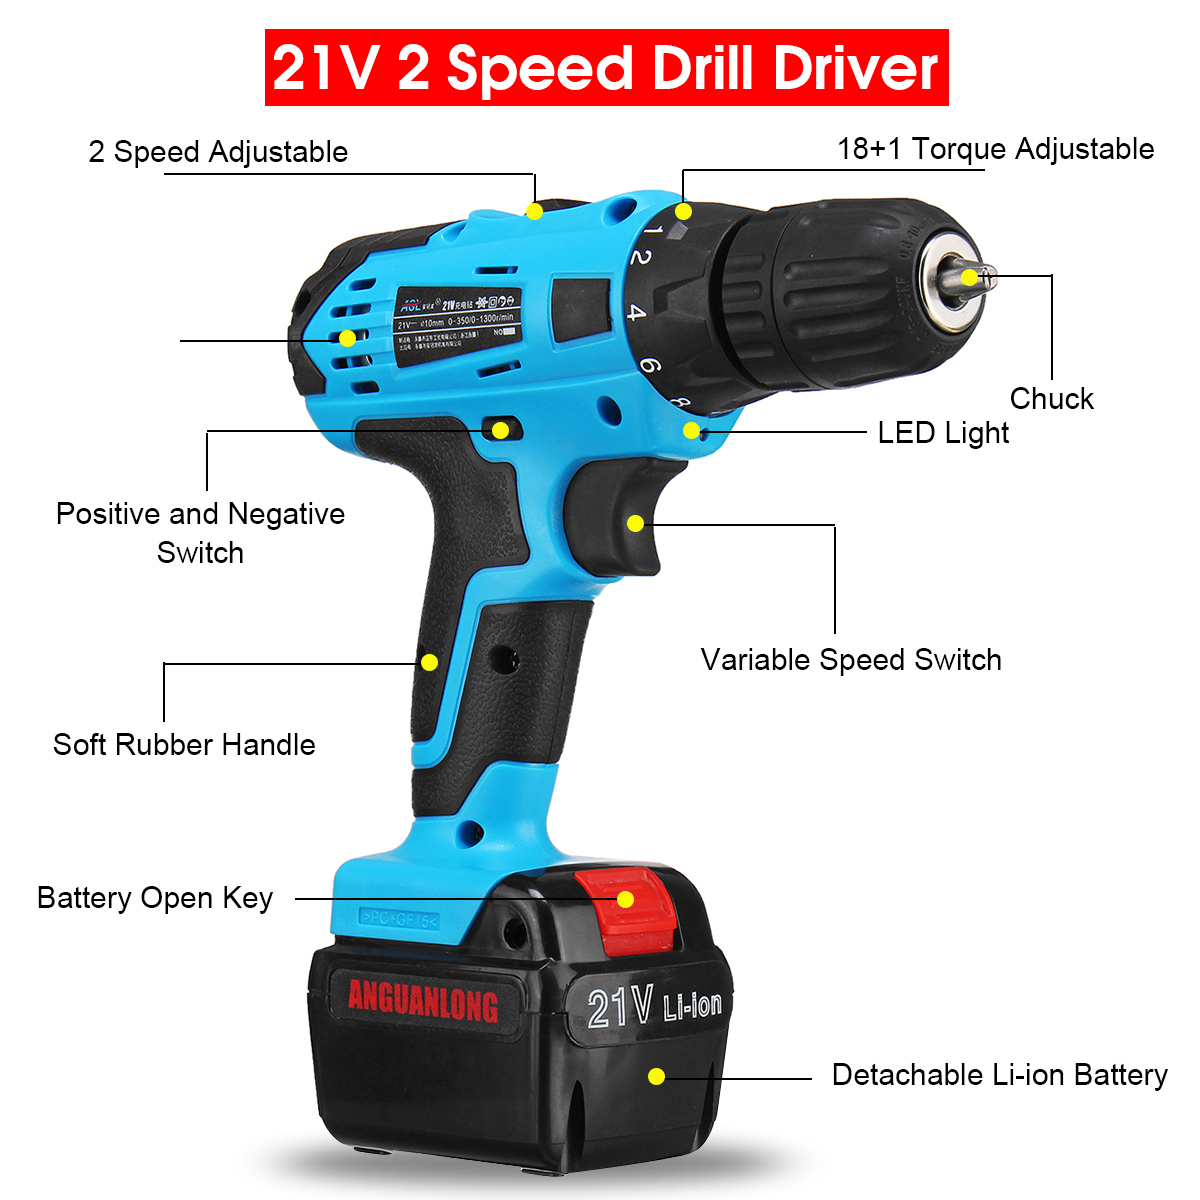 DROW-12V21V-Electric-Cordless-Hand-Drill-Kit-151181-Torque-Household-Electric-Screwdriver-Driver-Too-1430177-4